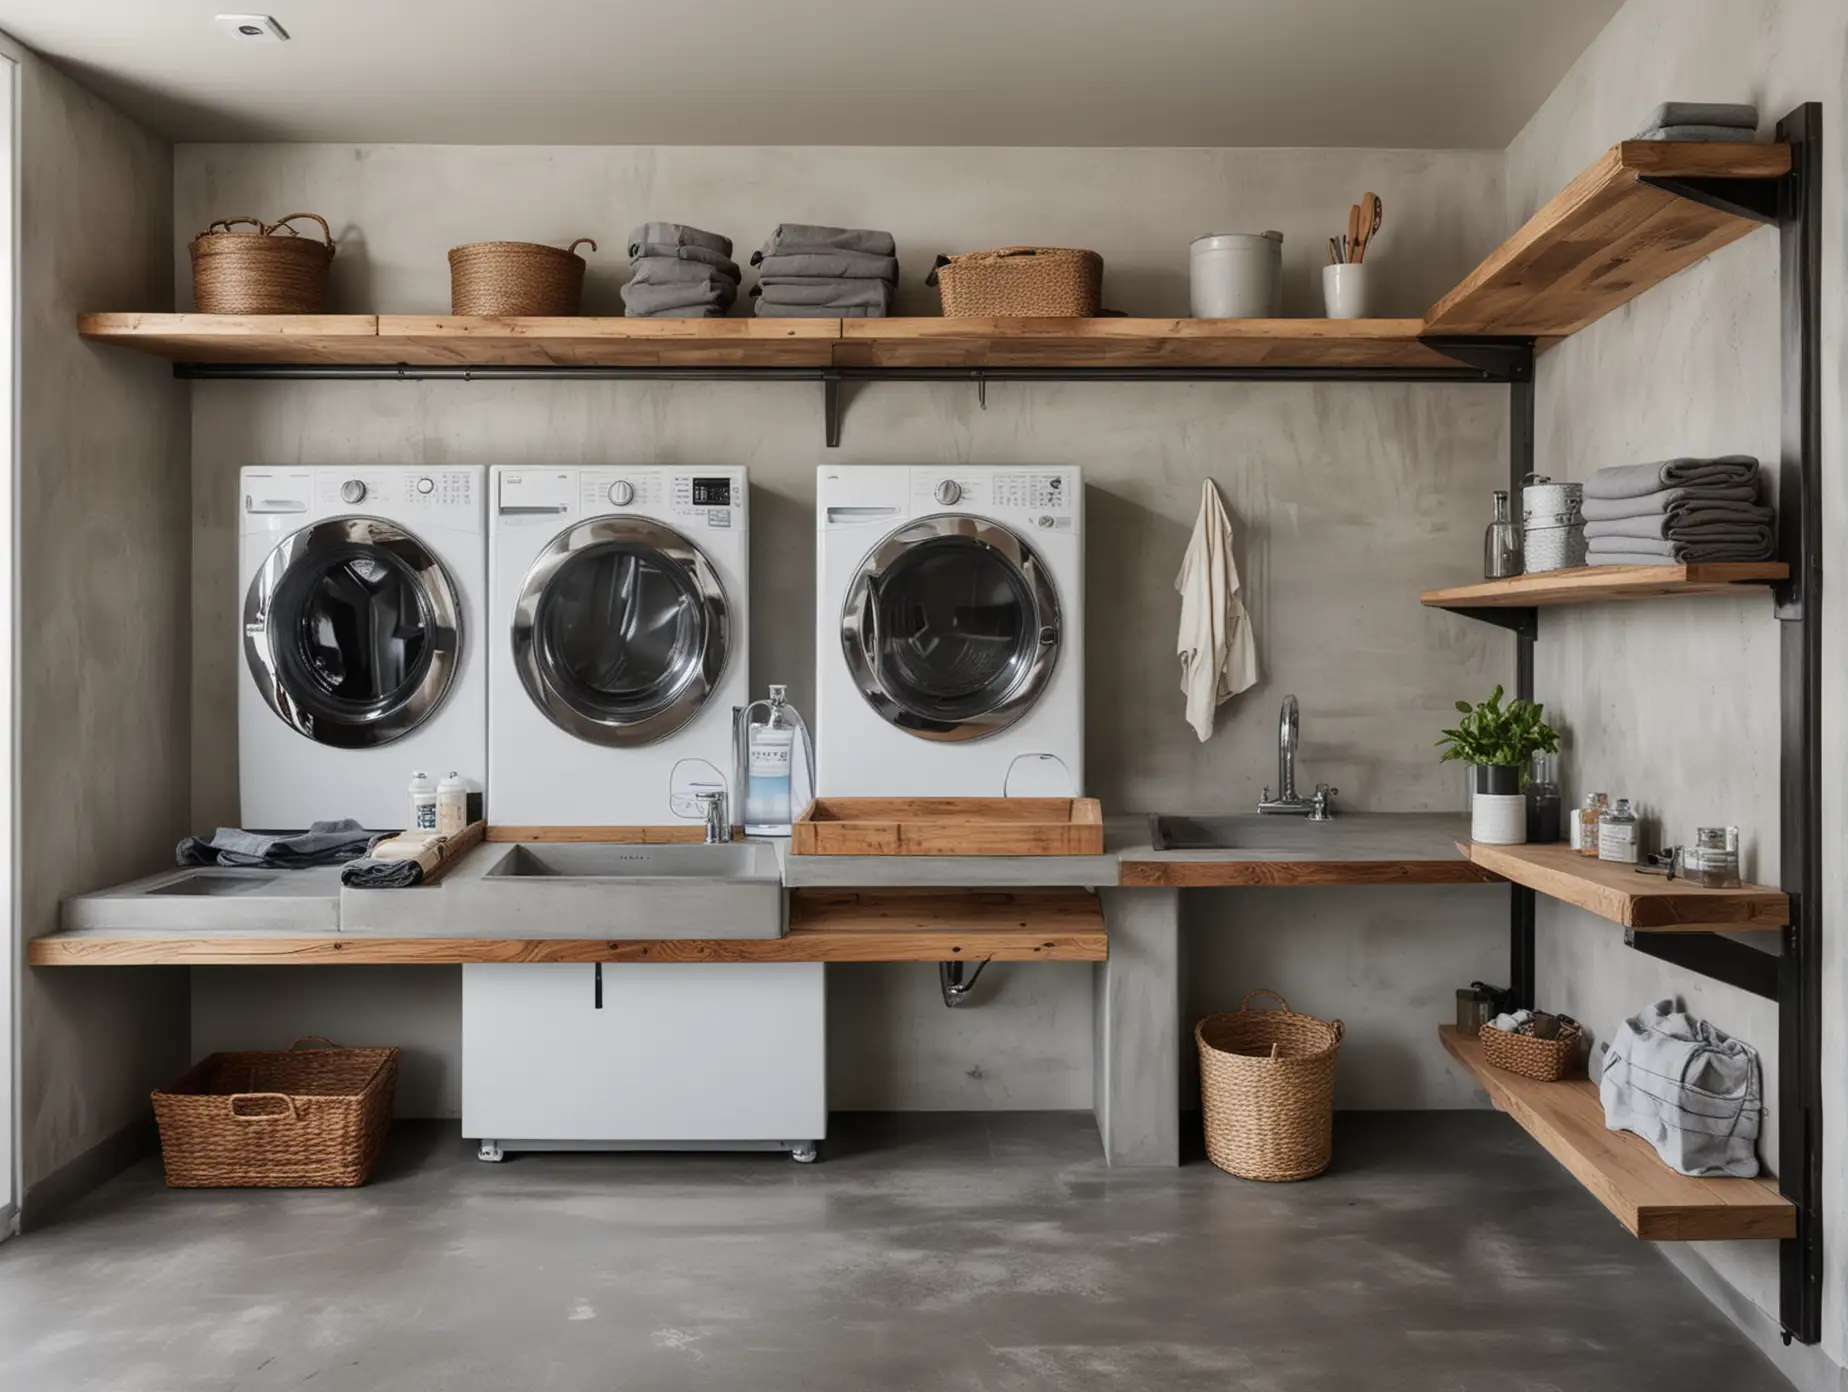 Illustrate a modern laundry room with clean lines, reclaimed wood shelving, an integrated ironing station, and polished concrete floors for an industrial-chic look.